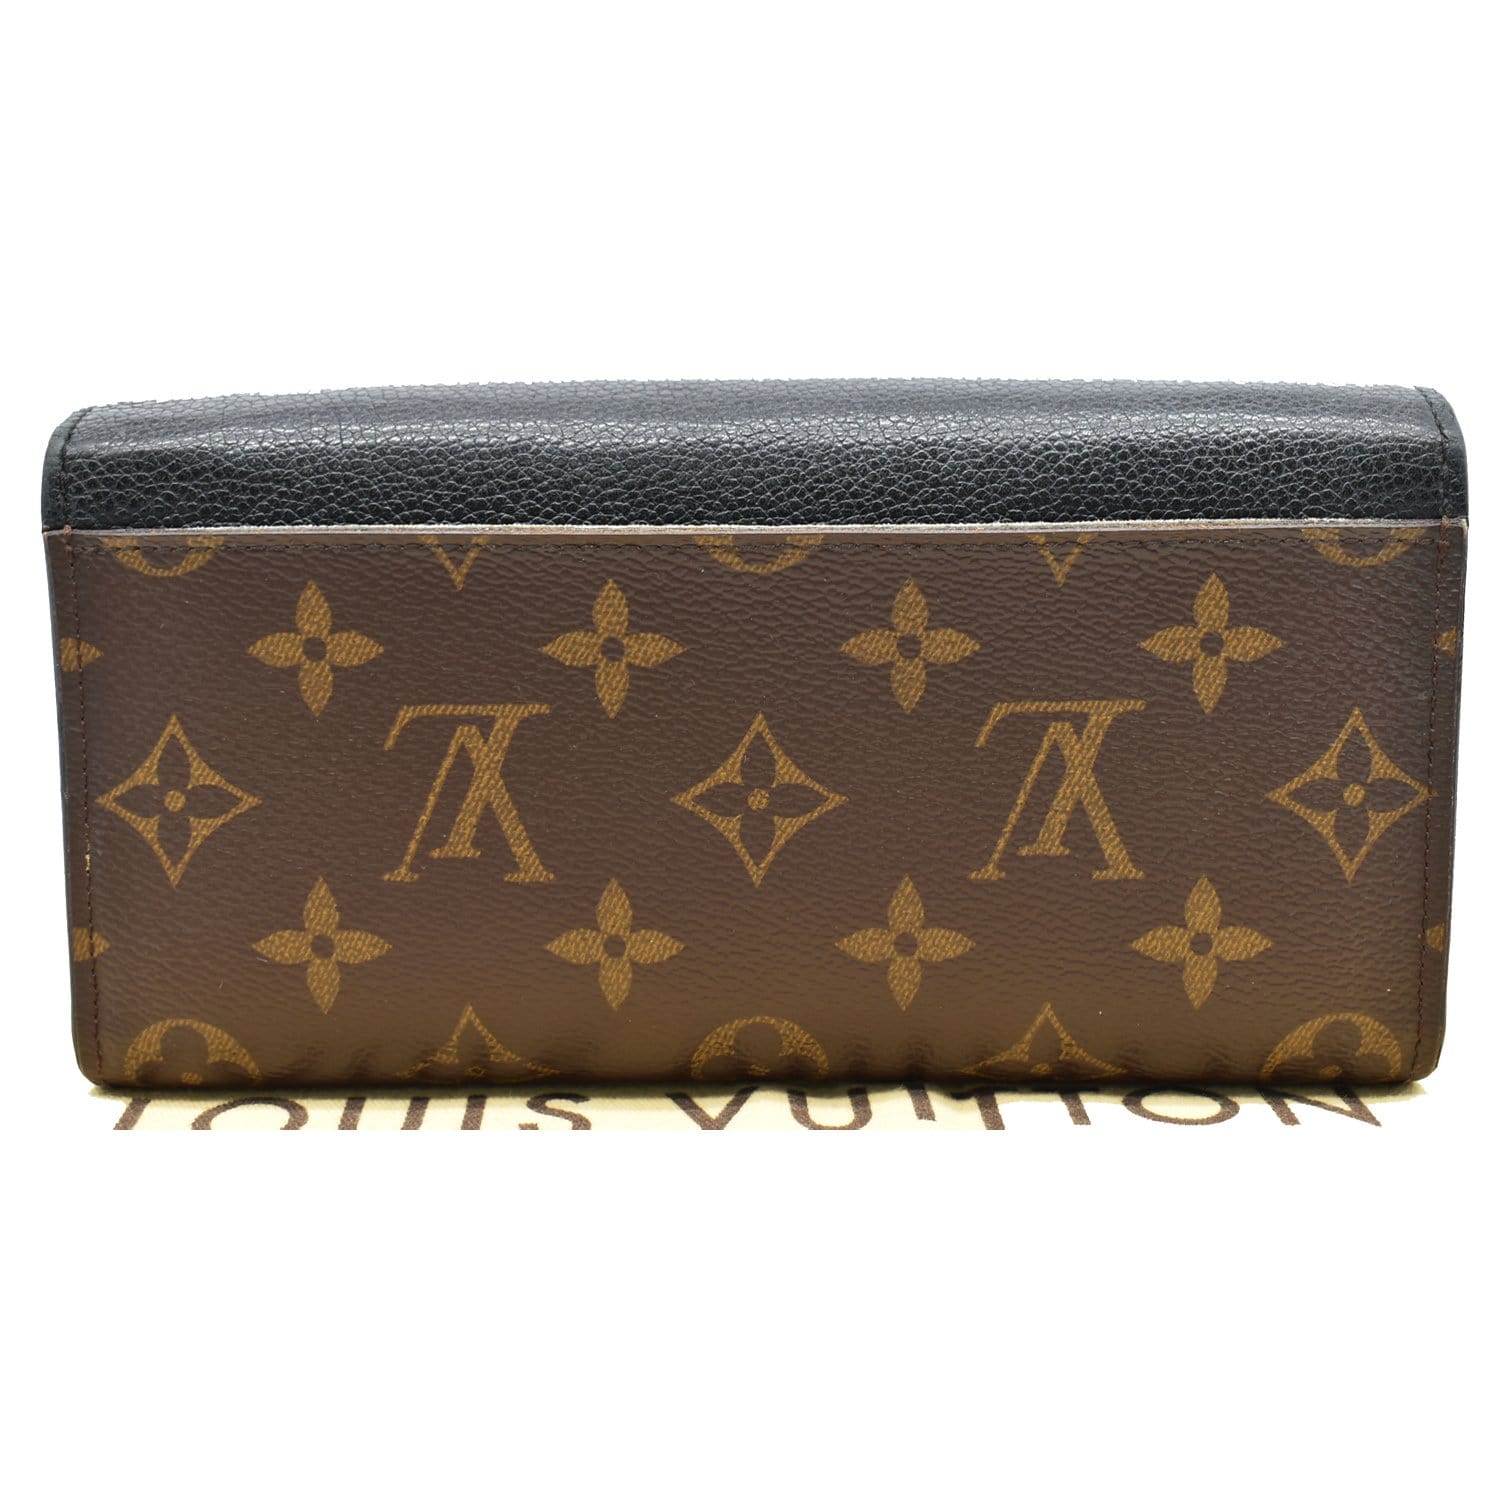 LOUIS VUITTON wallet in brown monogram coated canvas - VALOIS